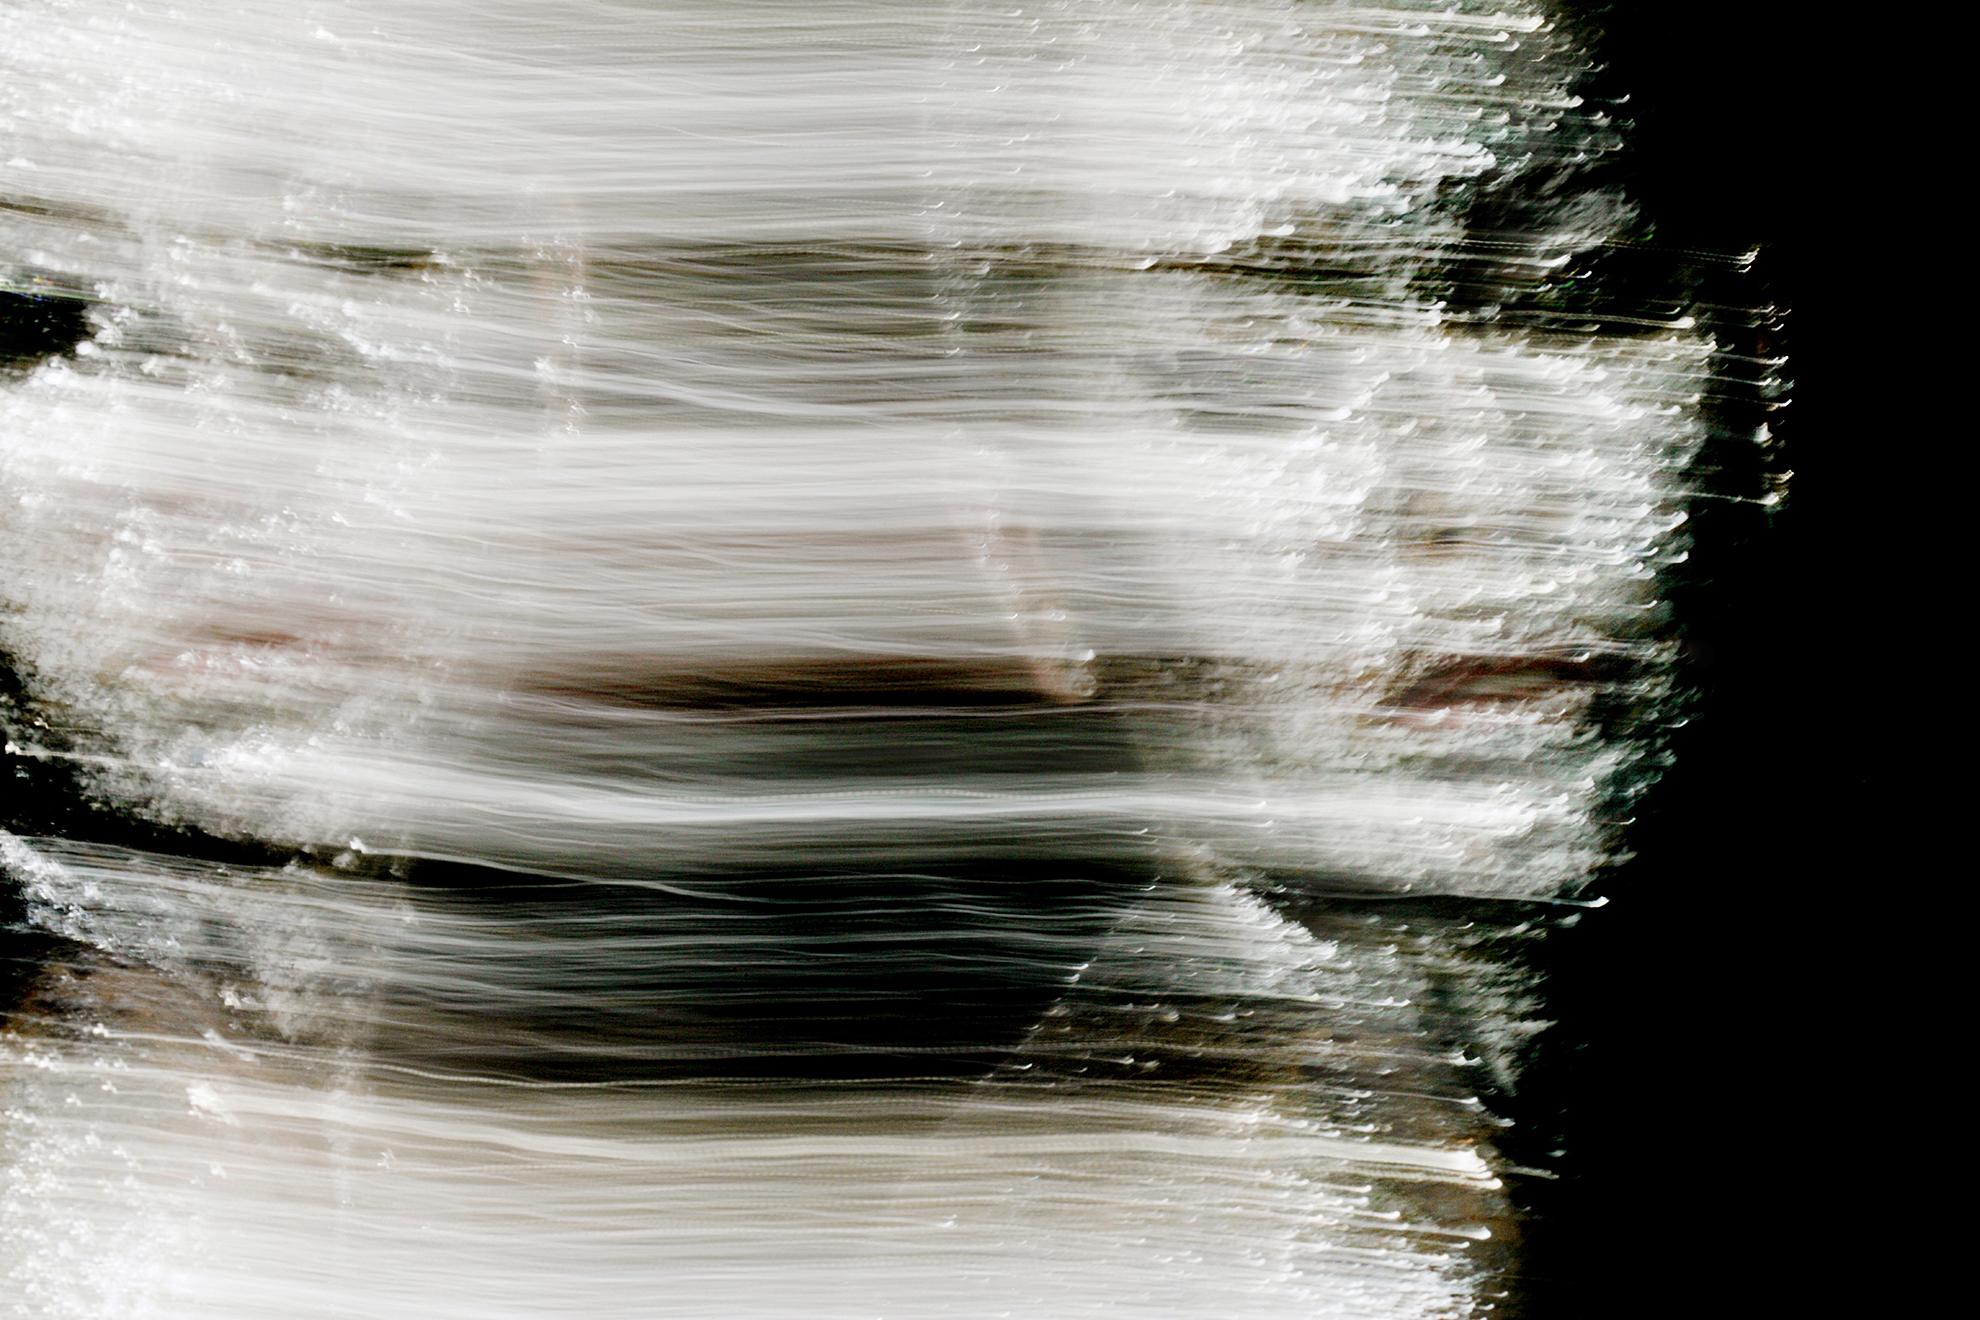 Roger Reist Abstract Photograph – There Is No Past – Abstrakt-expressionistische Kunstfotografie